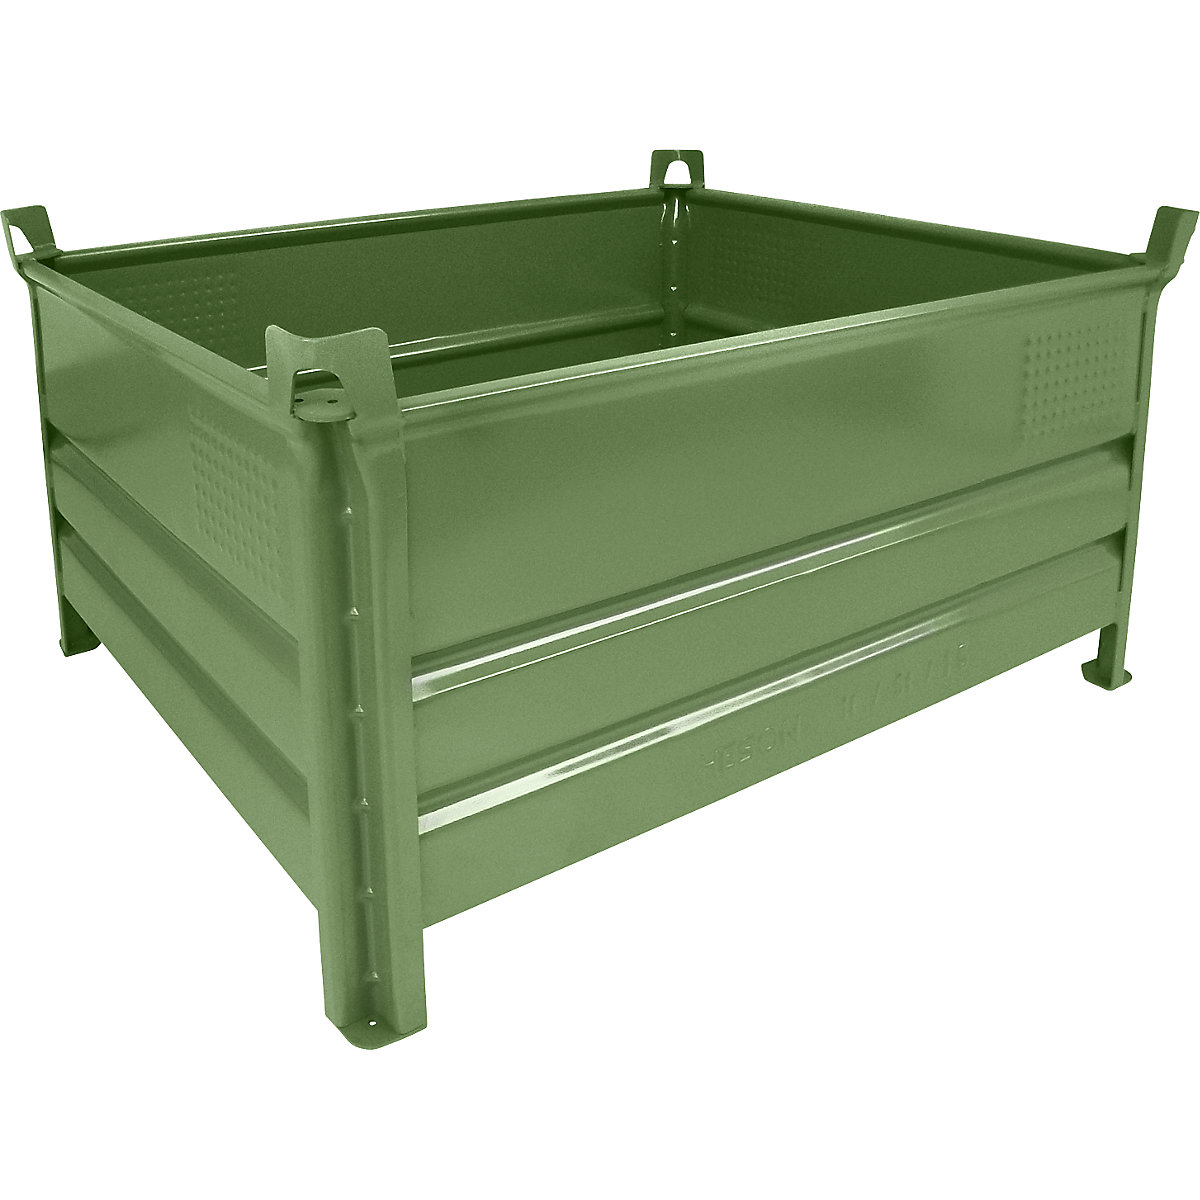 Solid panel box pallet – Heson, WxL 1000 x 1200 mm, max. load 1000 kg, green, 10+ items-8